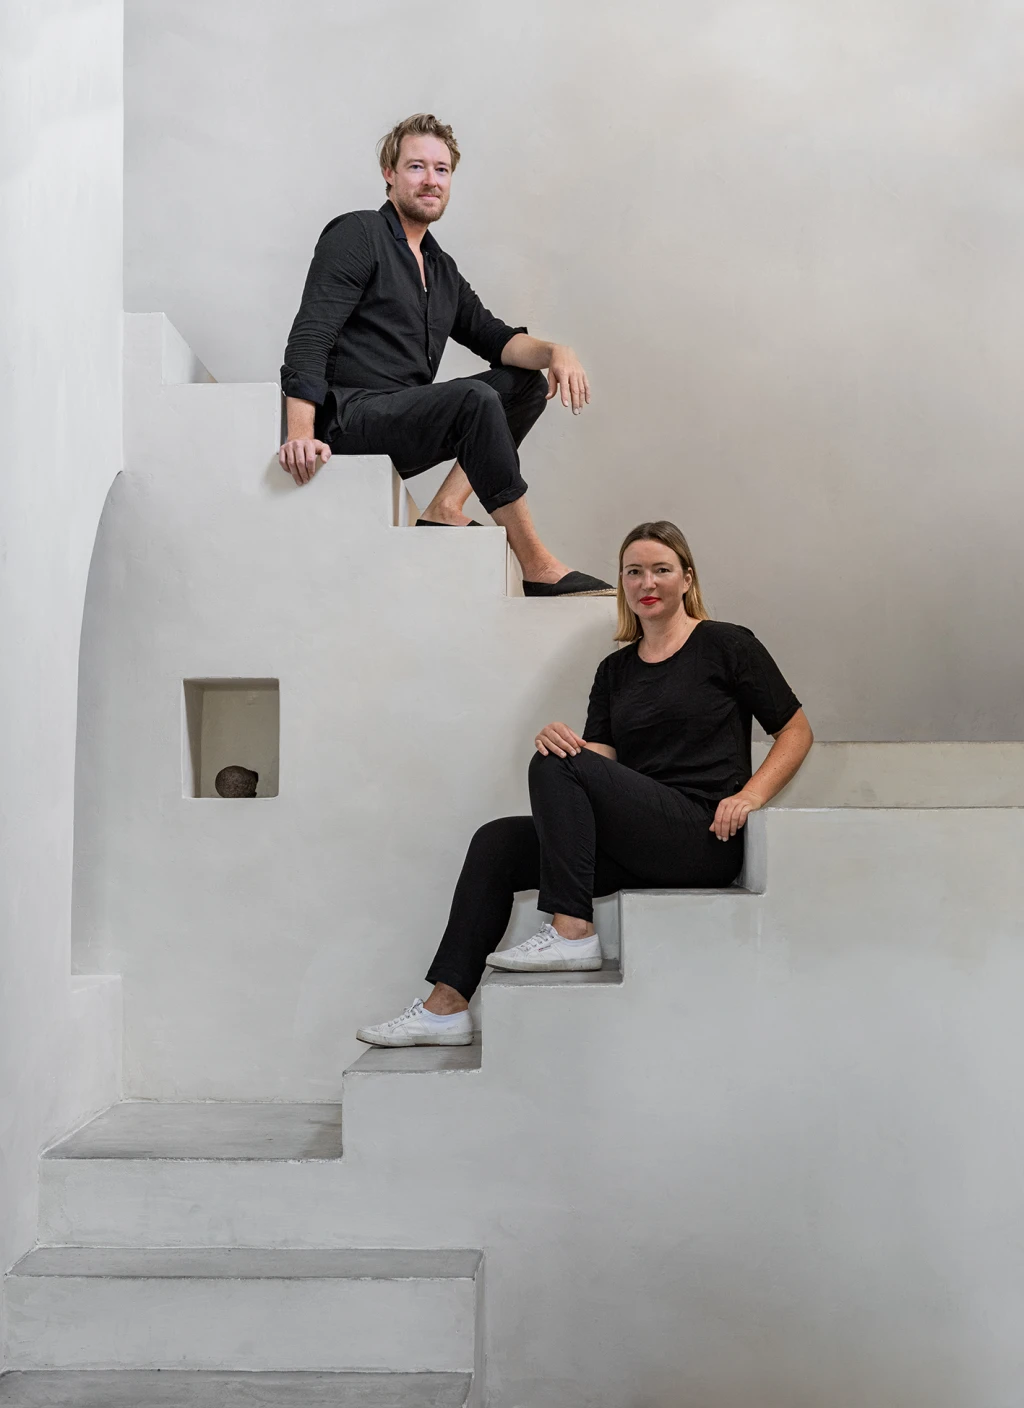 Sandra and Simon, an art director and an architect took on the challenge to renovate a beautiful, but dilapidated house in the charming town of Montegrazie, Liguria.